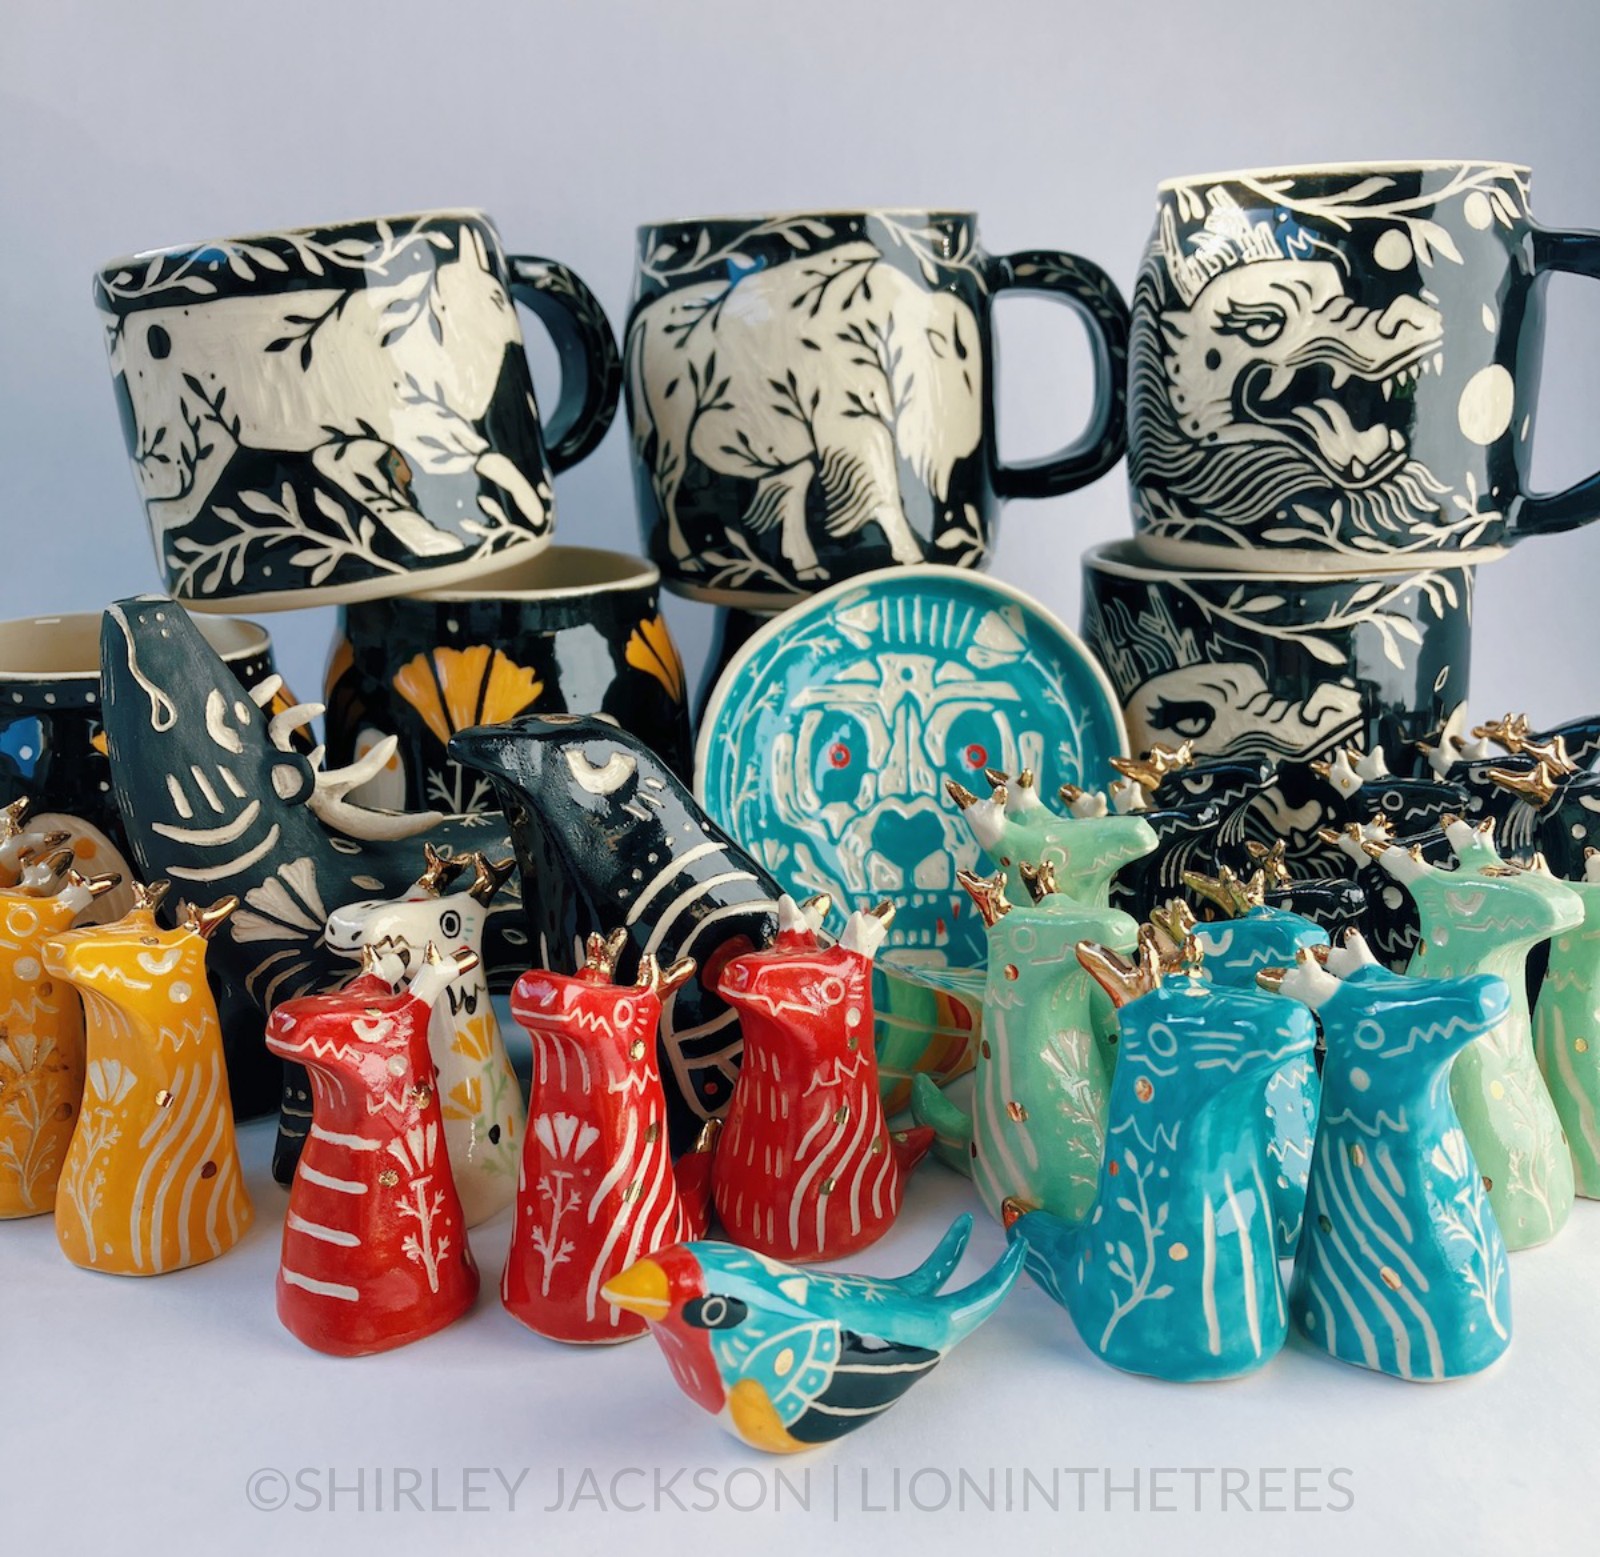 A colourful collection of pottery featuring little dragon totems, a small barn swallow totem, larger animal totems in the back, and further in the back are mugs/vessels stacked on top of each other.